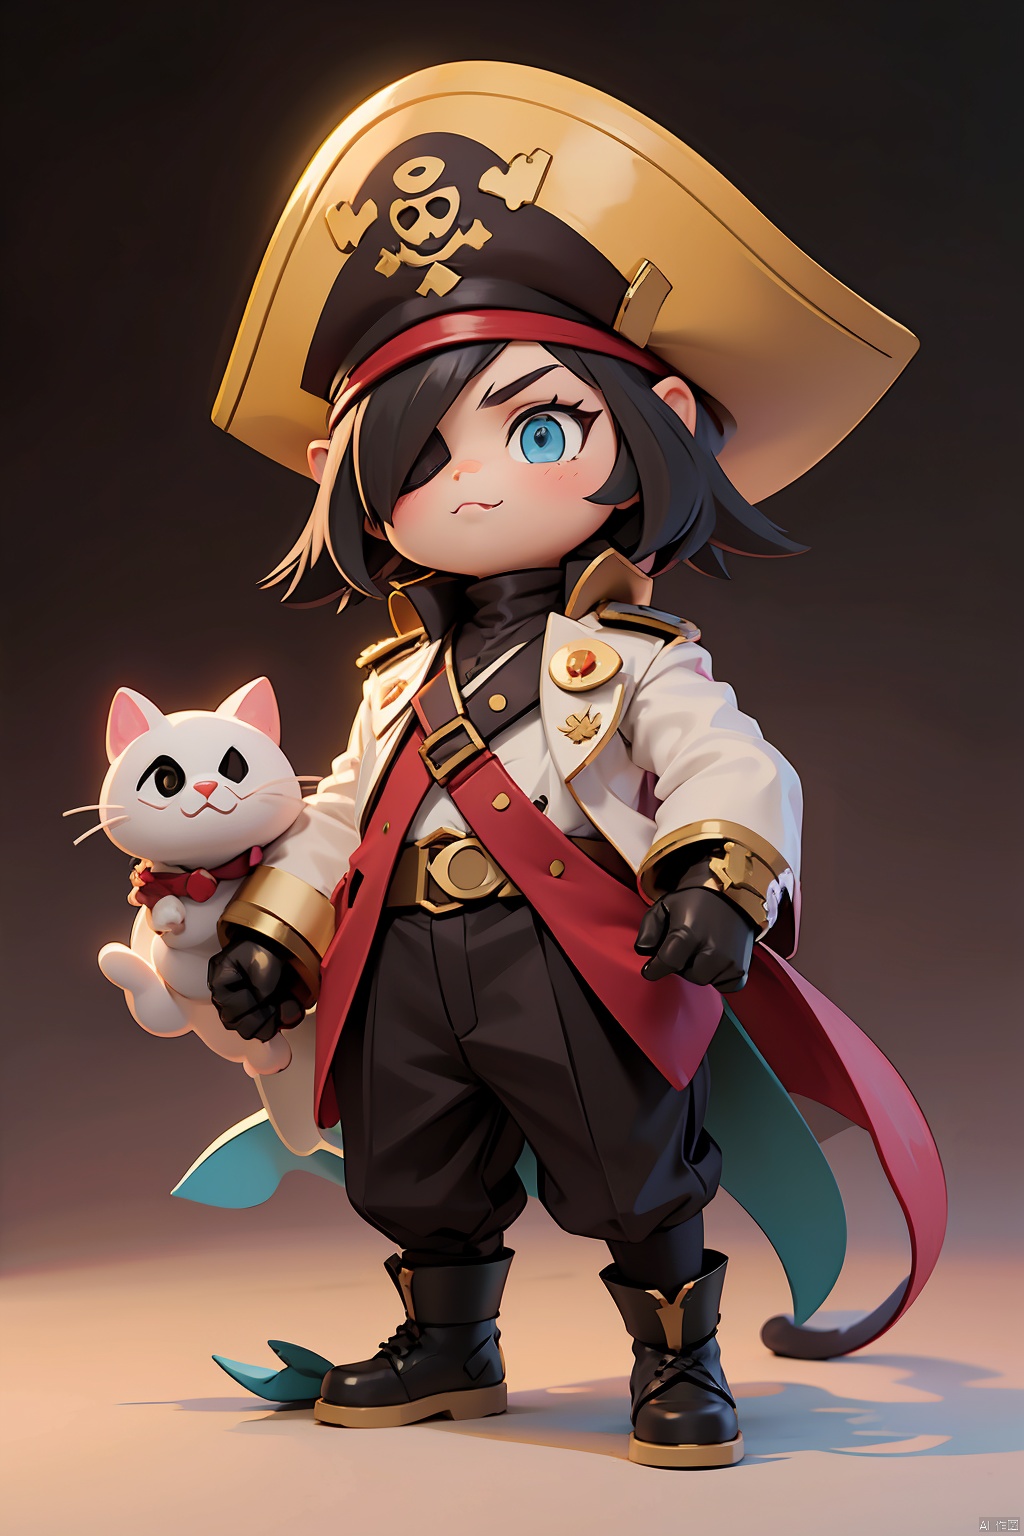  1cat, pirate captain's single-eye eyepatch, one-eyed cat captain wearing captain's clothing and a captain's tricorn hatpokemon_\(creature\), solo, full_body, Standing, gradient_background,